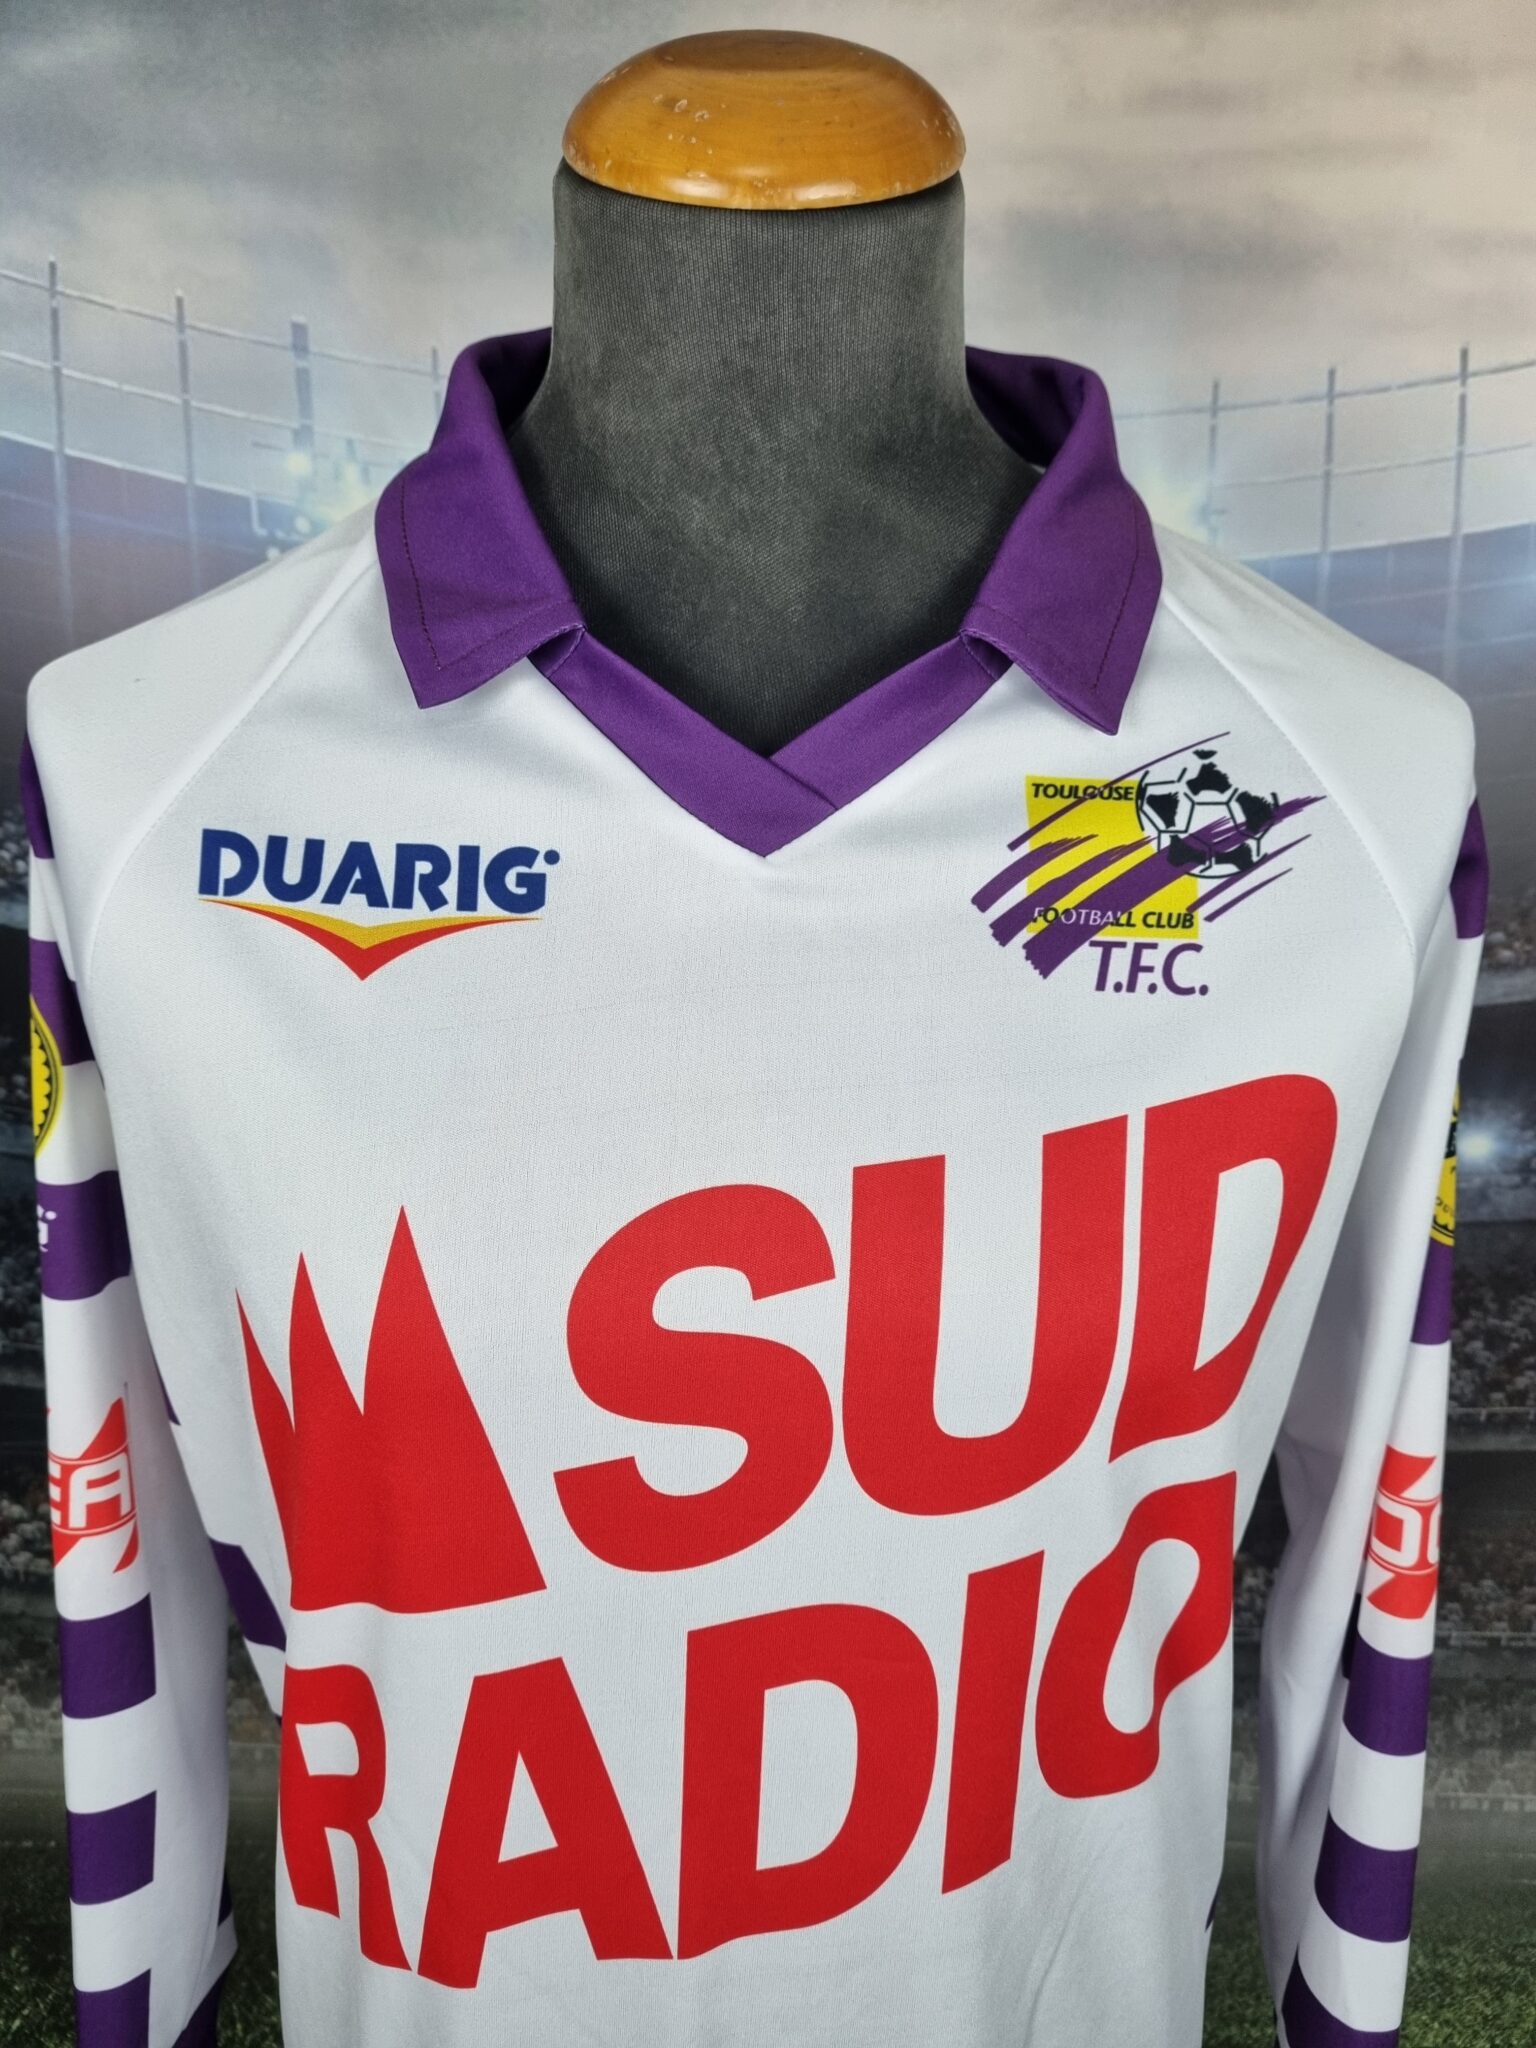 FC Toulouse Football Shirt 1992/1992 Home TFC Retro Maillot Vintage Jersey France - Sport Club Memories